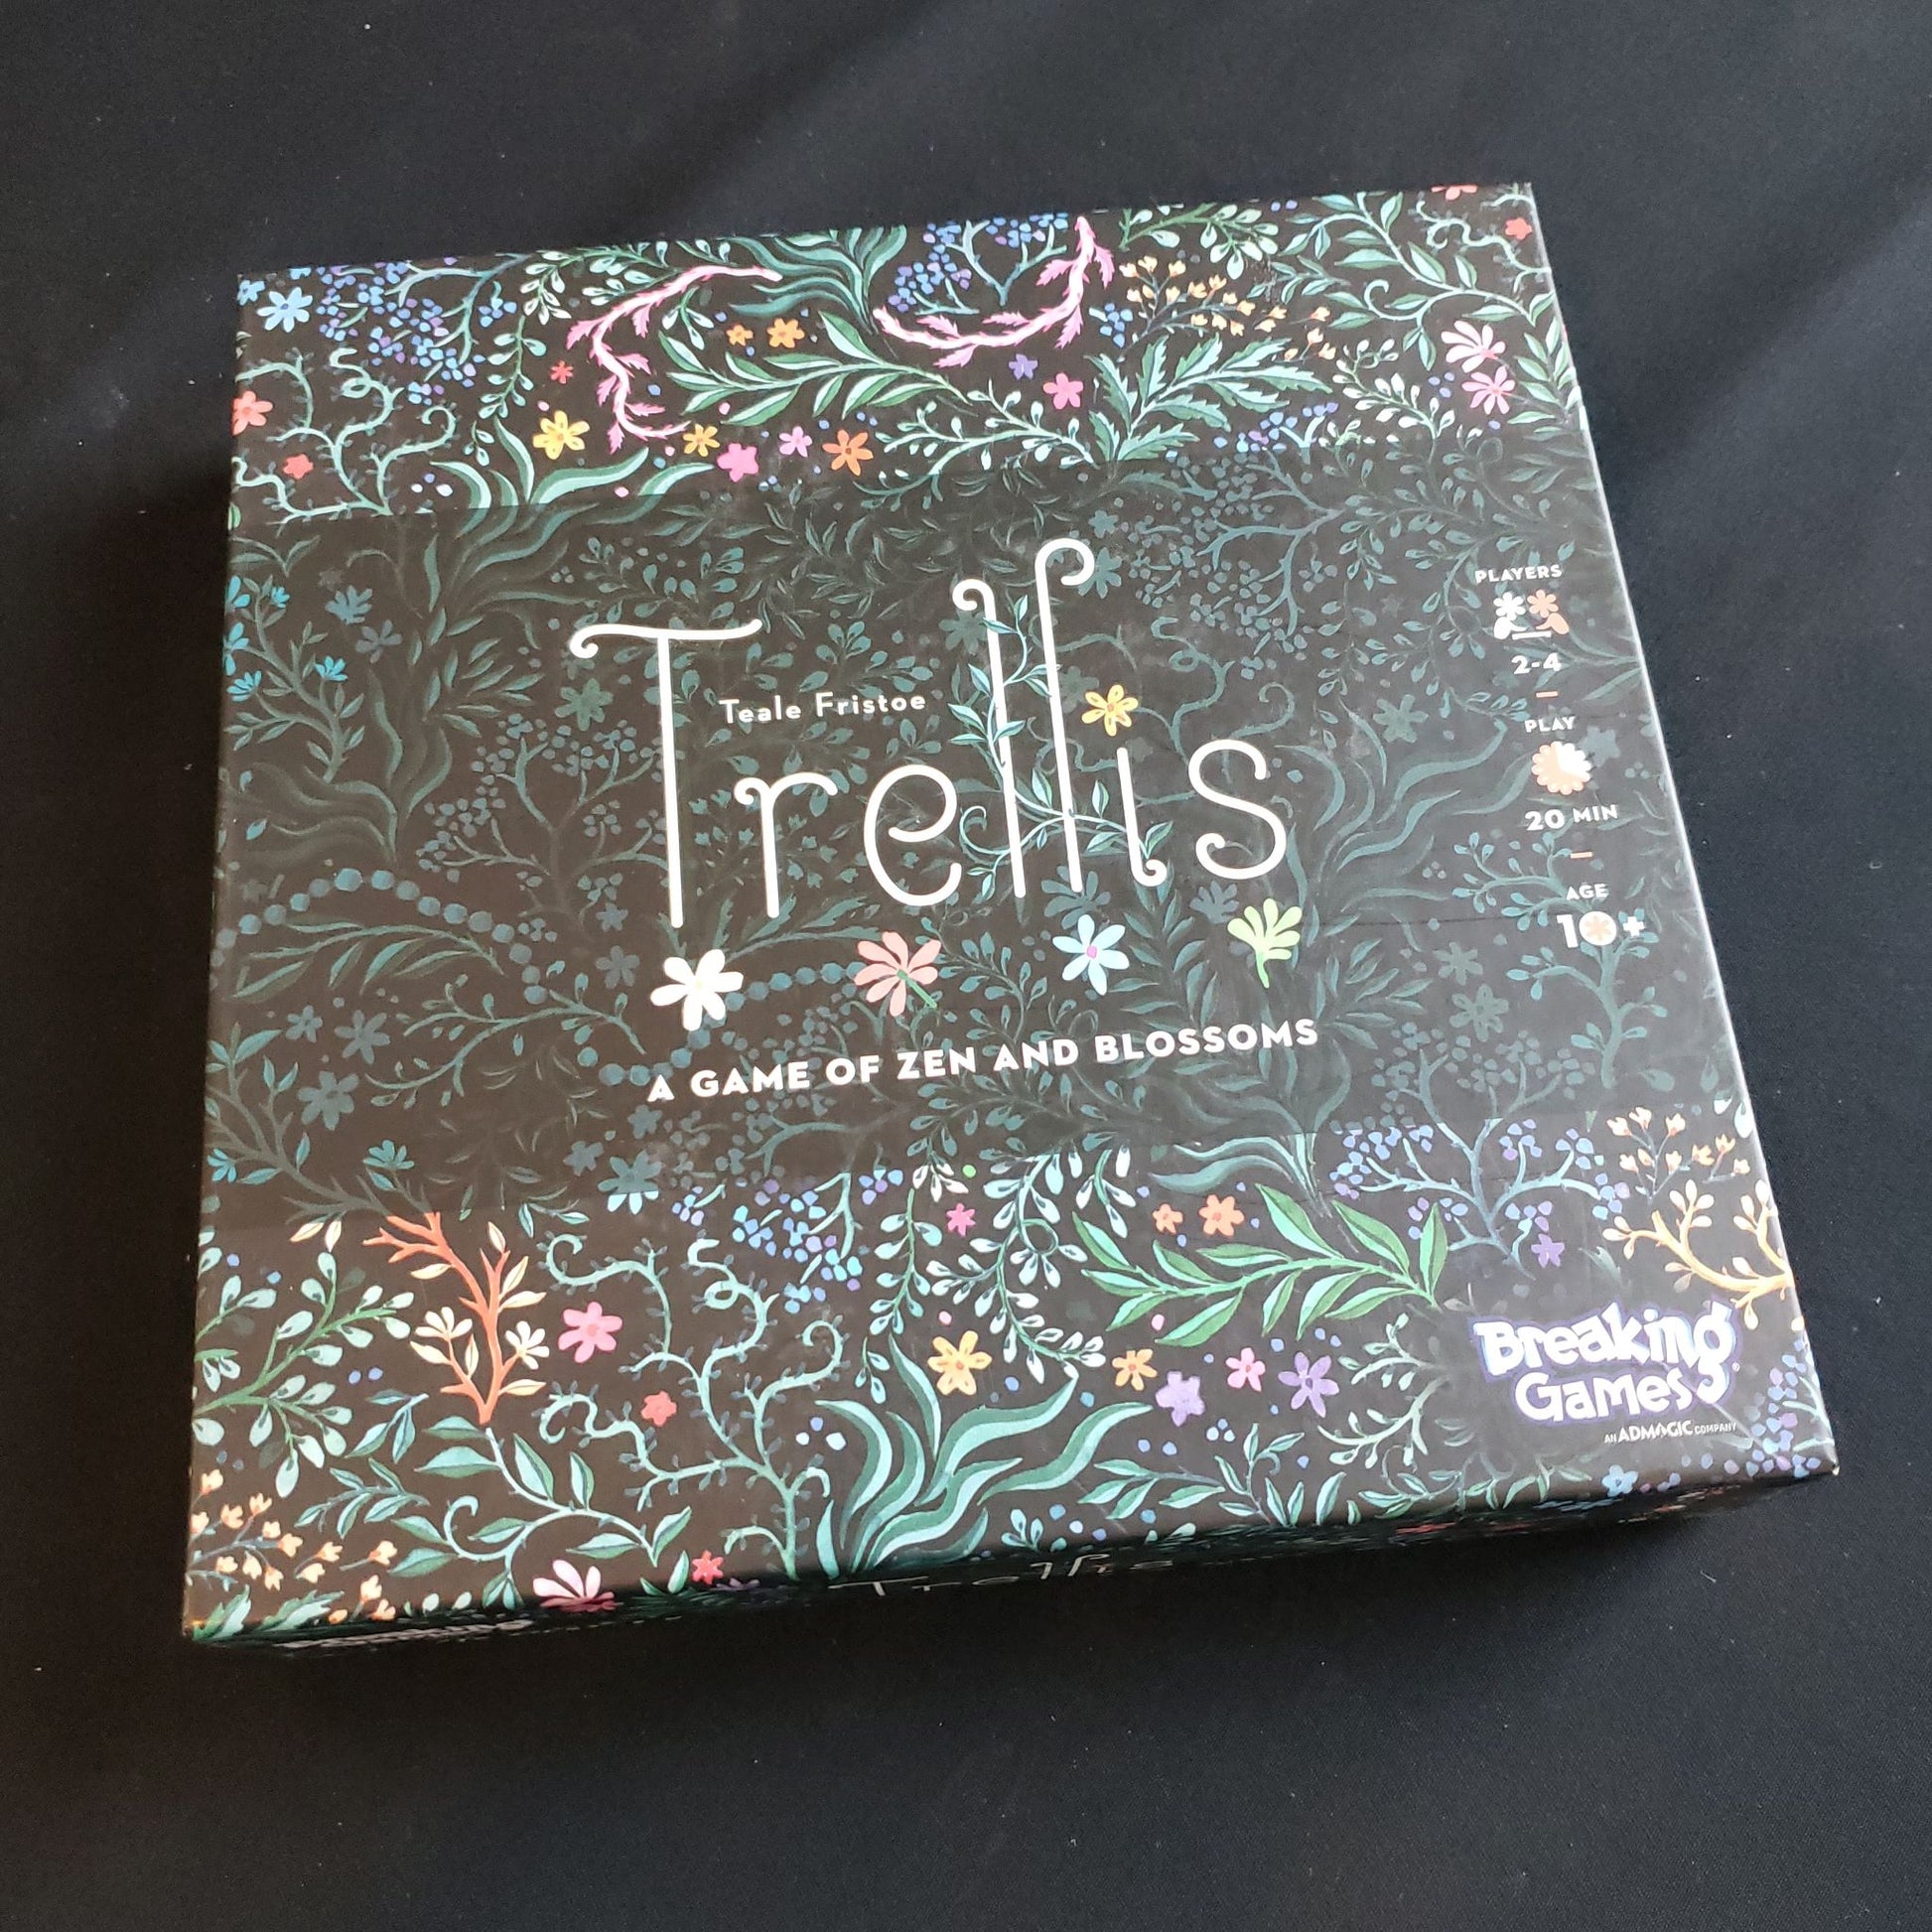 Trellis board game - front cover of box